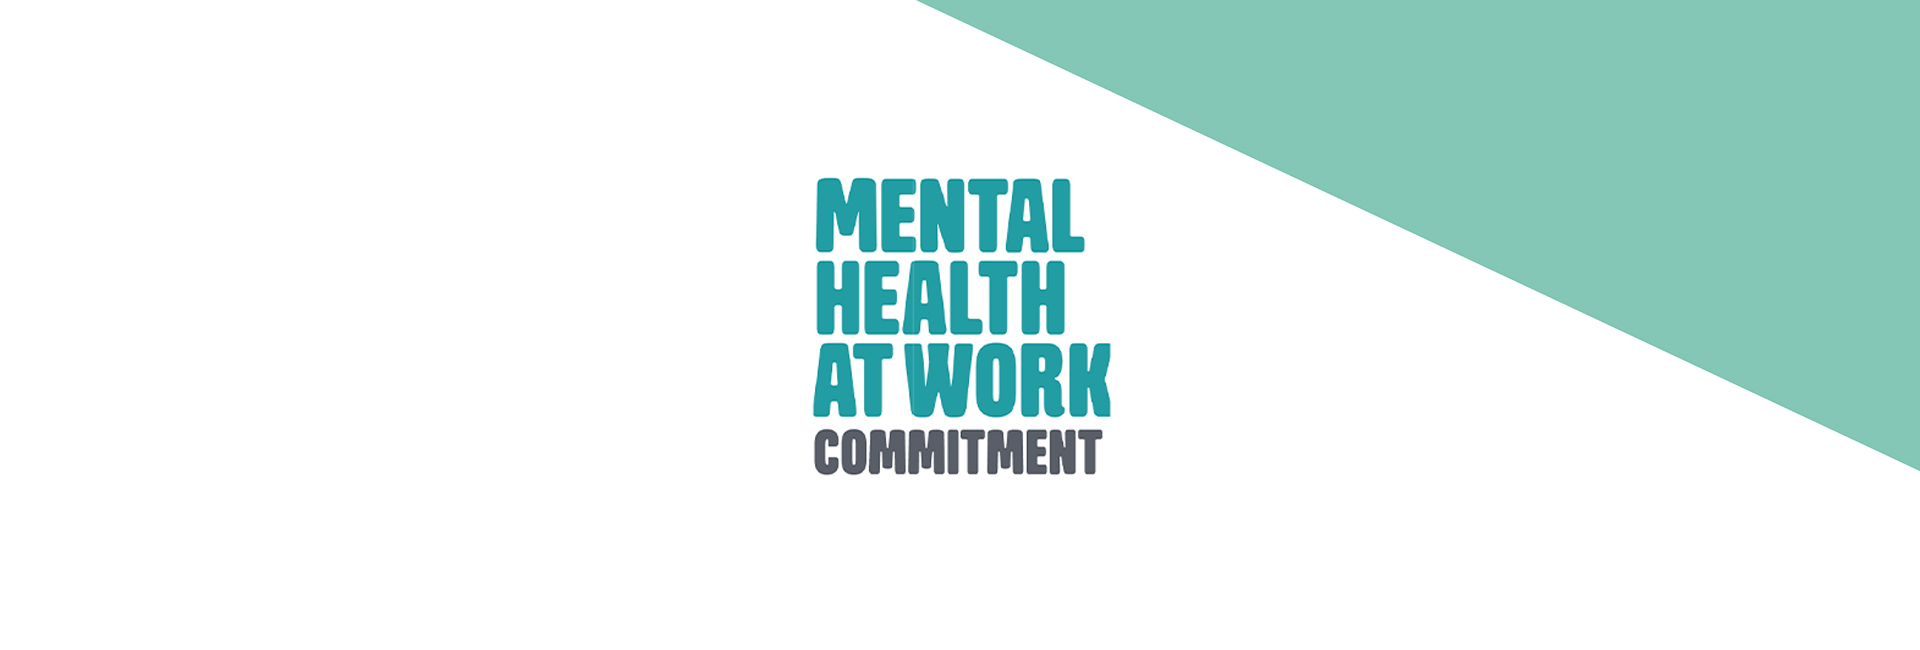 Pareto signs Mental Health at Work Commitment